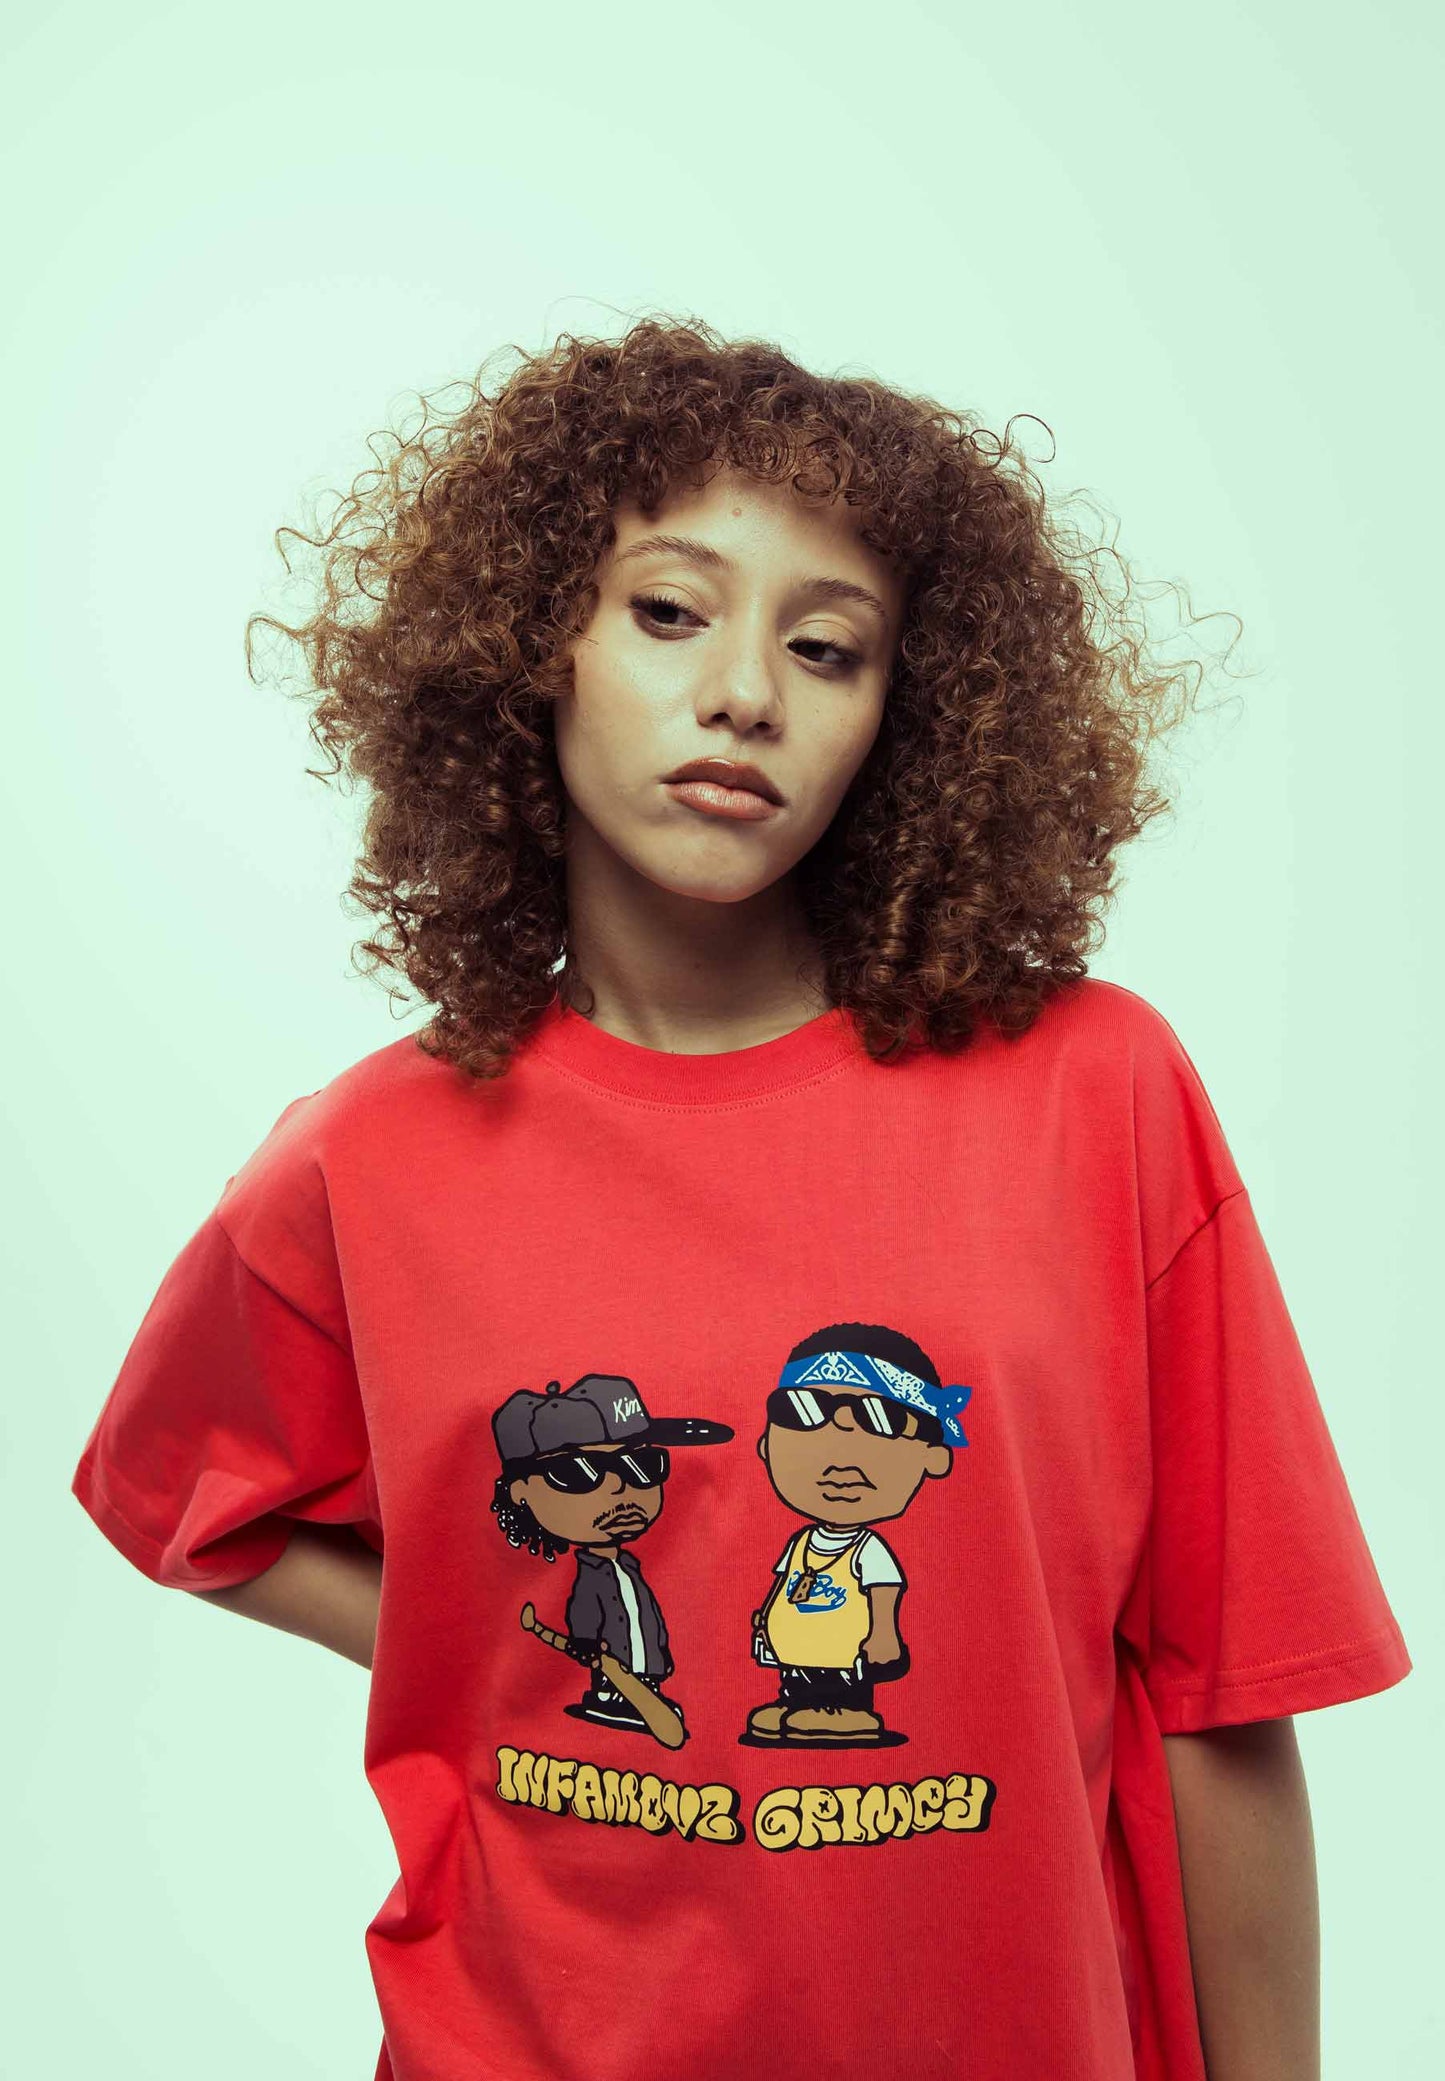 THE LORDS REGULAR TEE RED